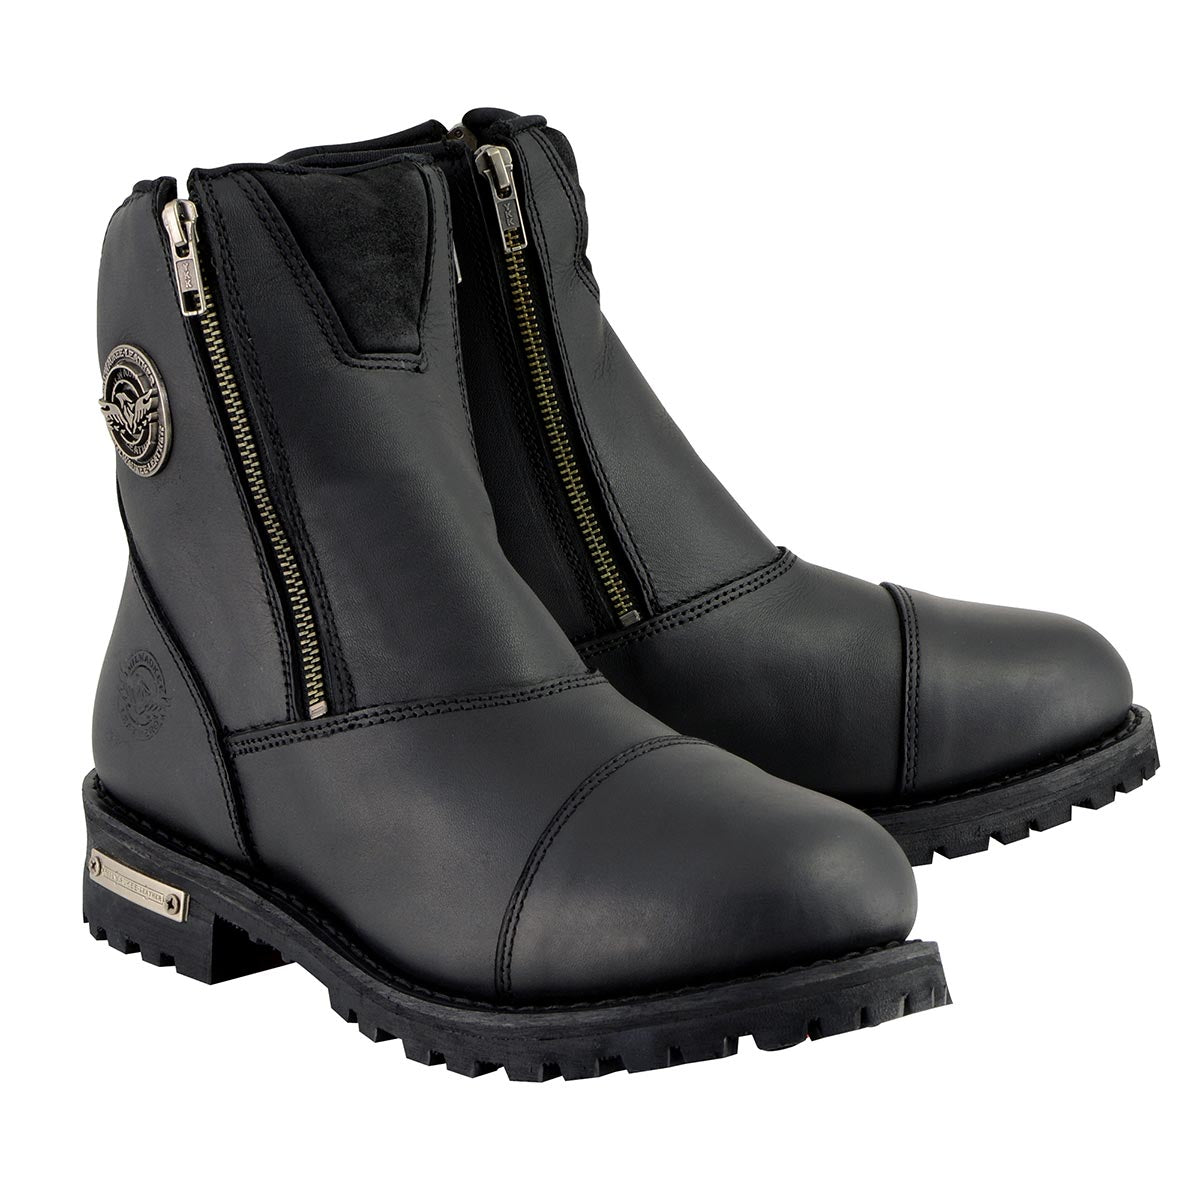 Milwaukee Leather MBL202 Women's Black Leather Double Sided Zipper Motorcycle Riding Boots